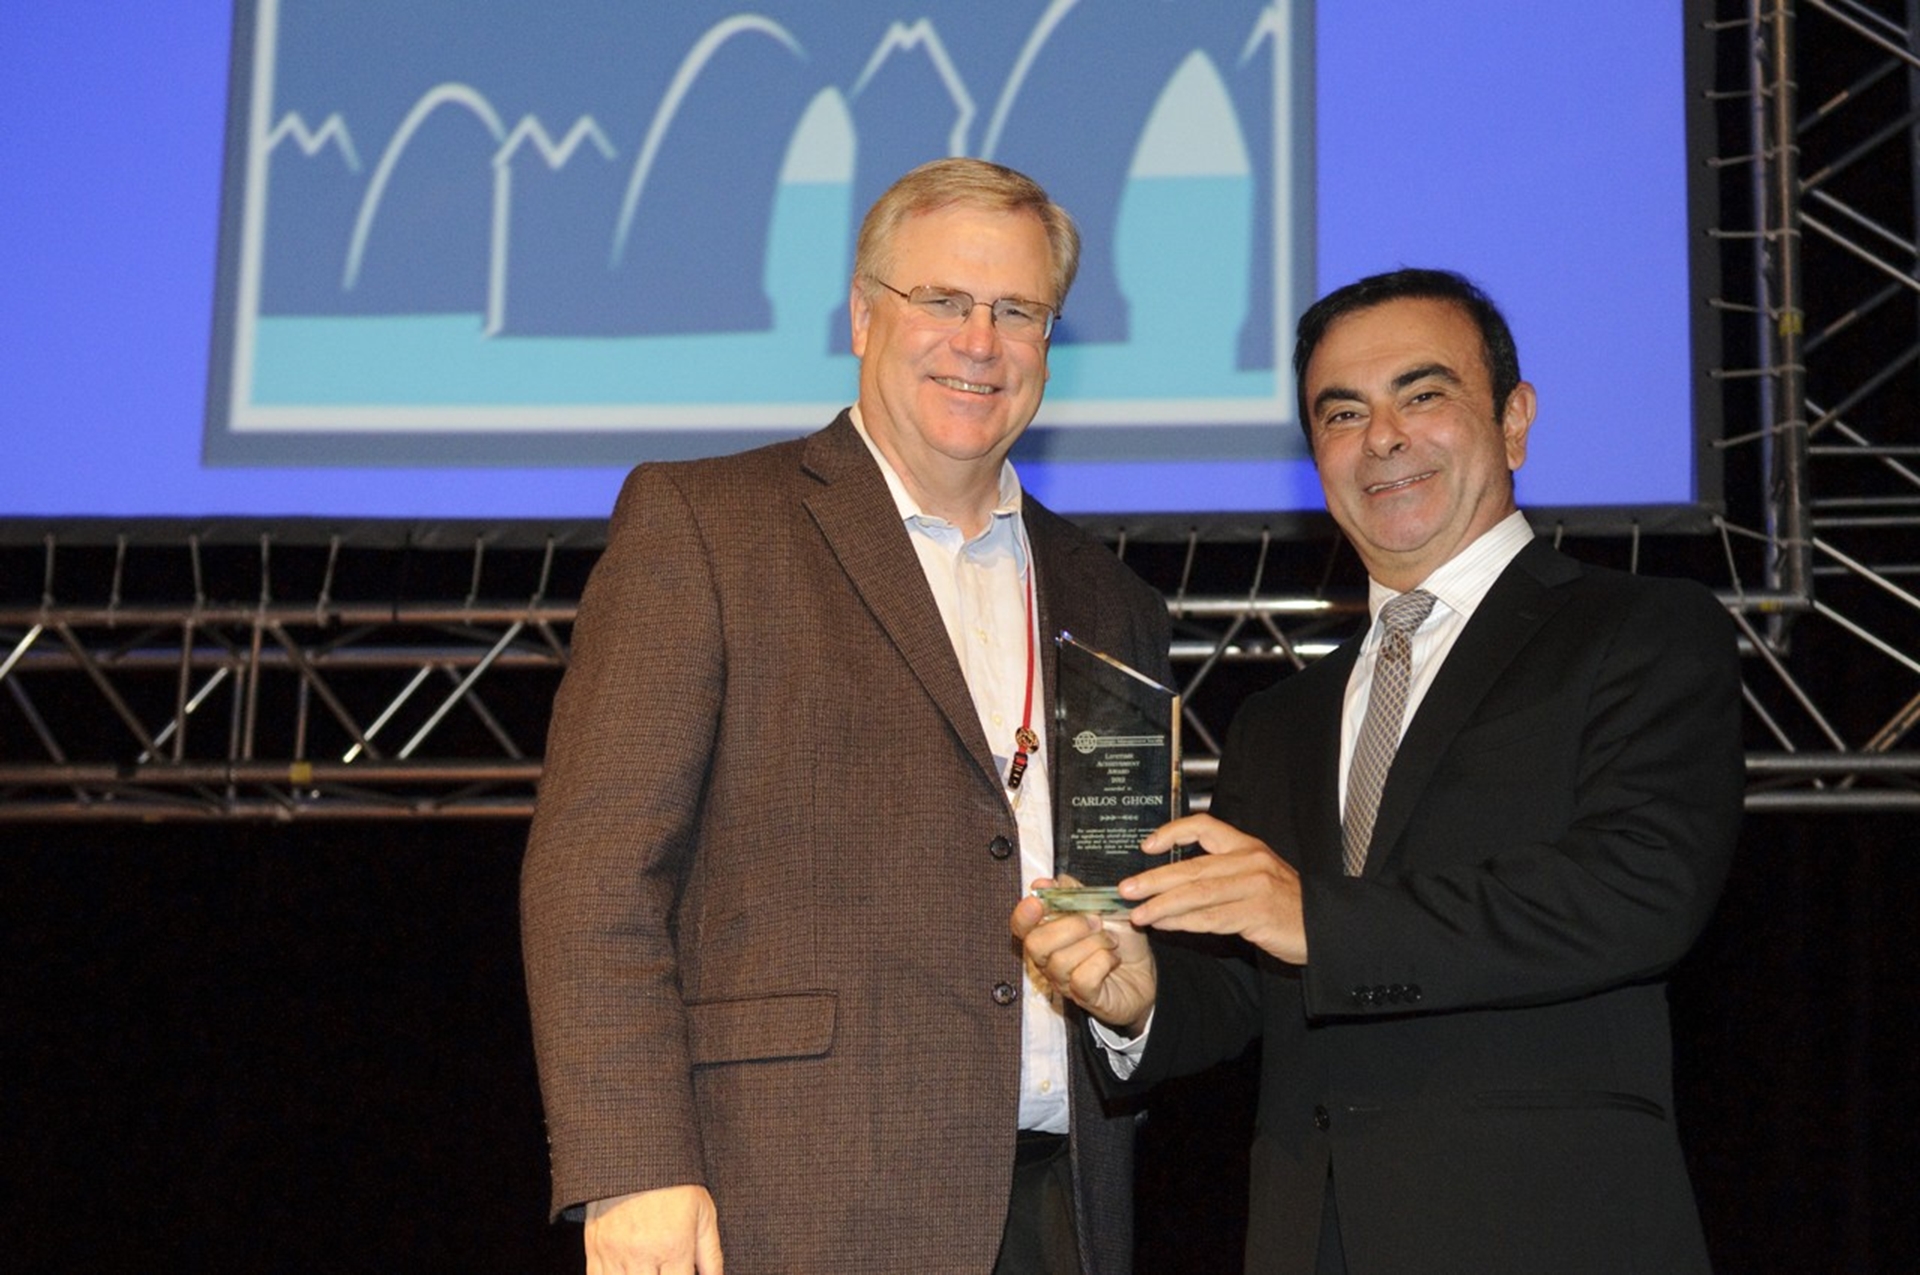 Ghosn wins lifetime achievement award from Strategic Management Society